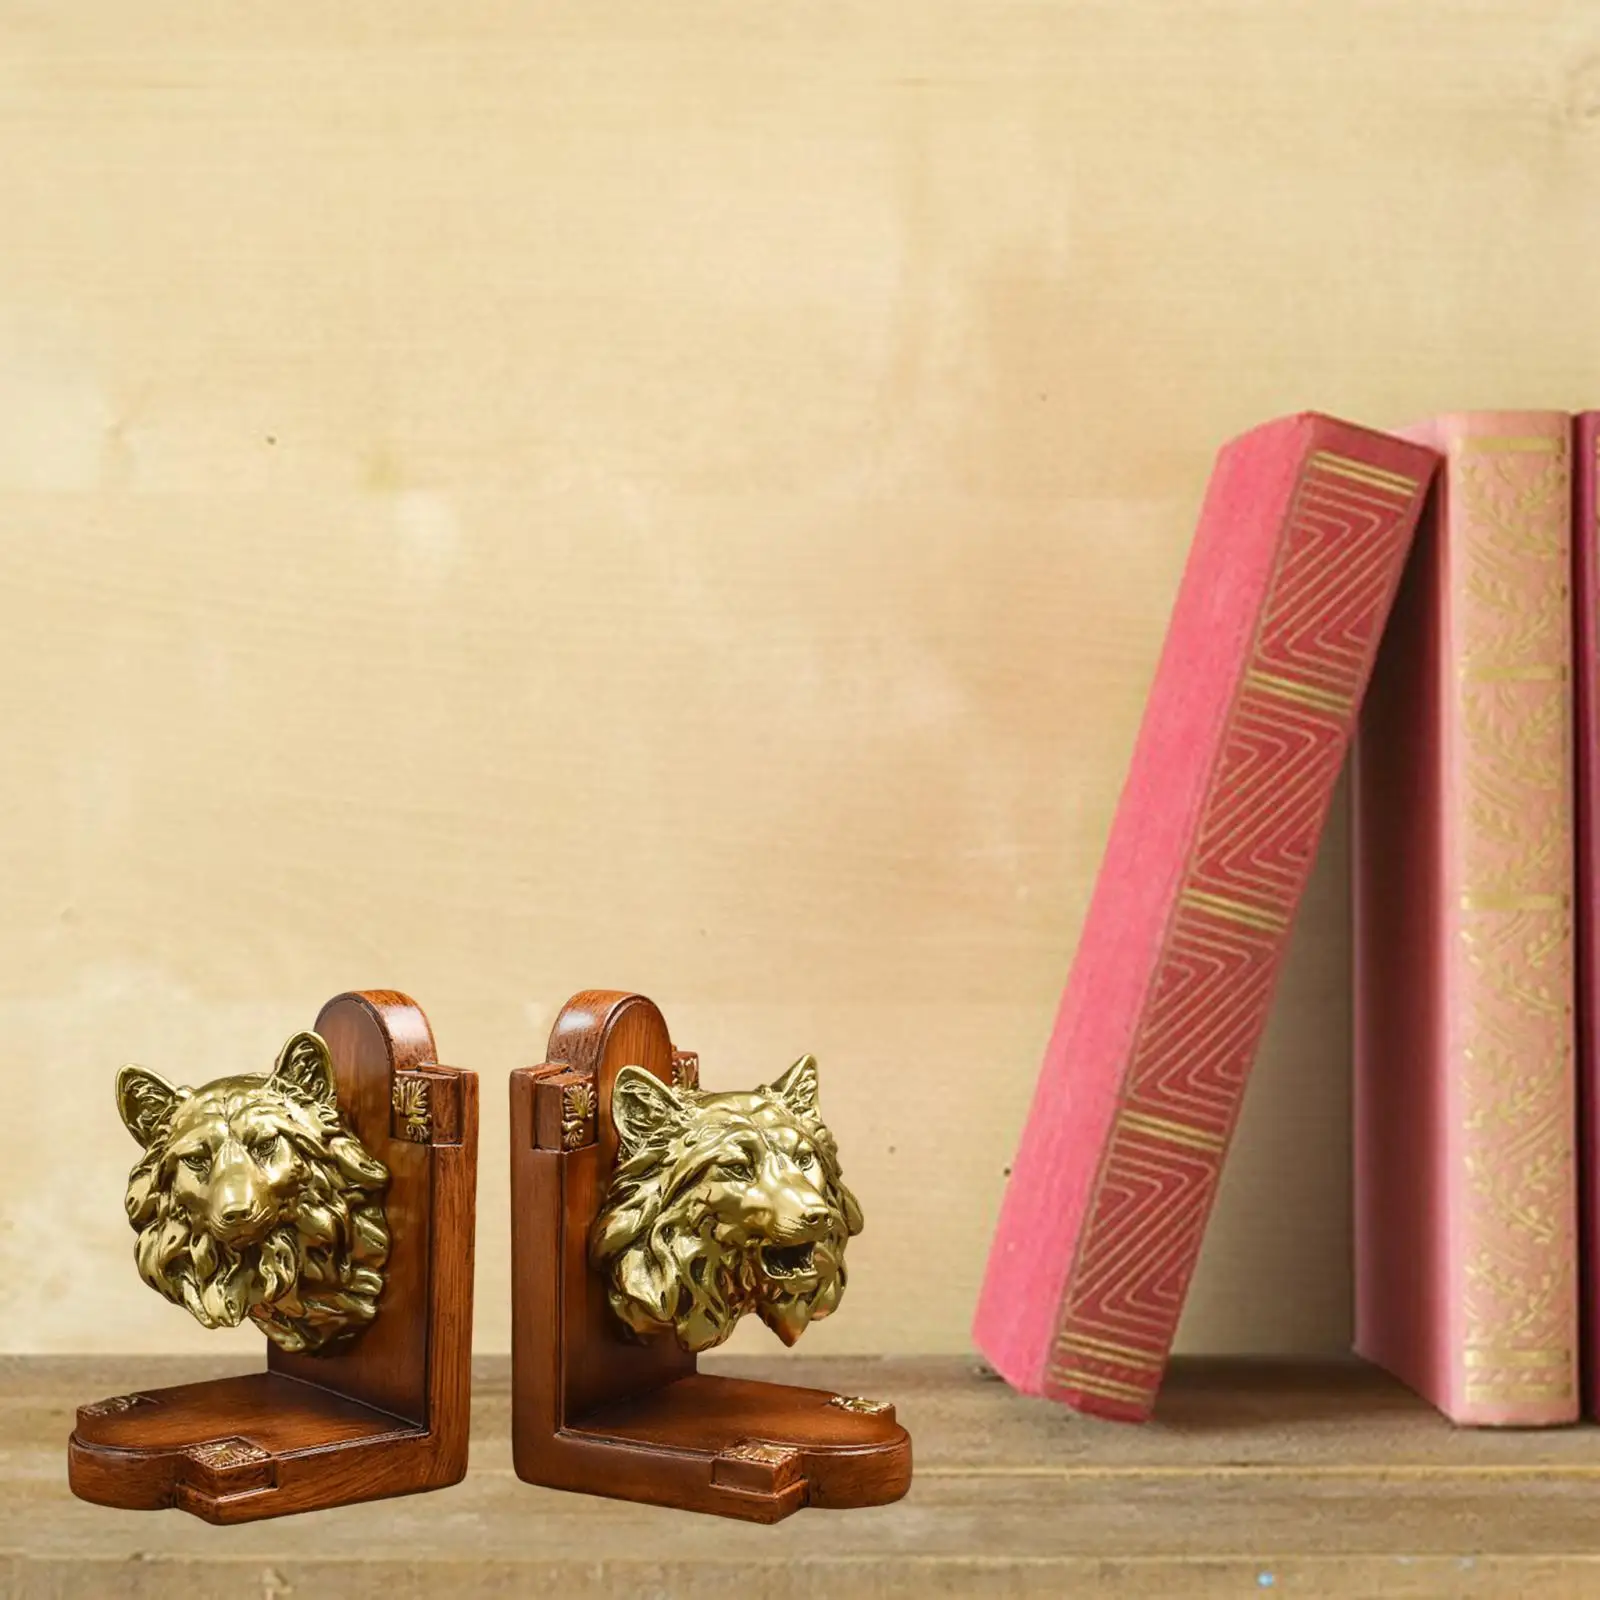 Decorative Bookends for Heavy Books Statue Ornament Sculpture Book Support for School Bookshelf Living Room Vinyl Records Table